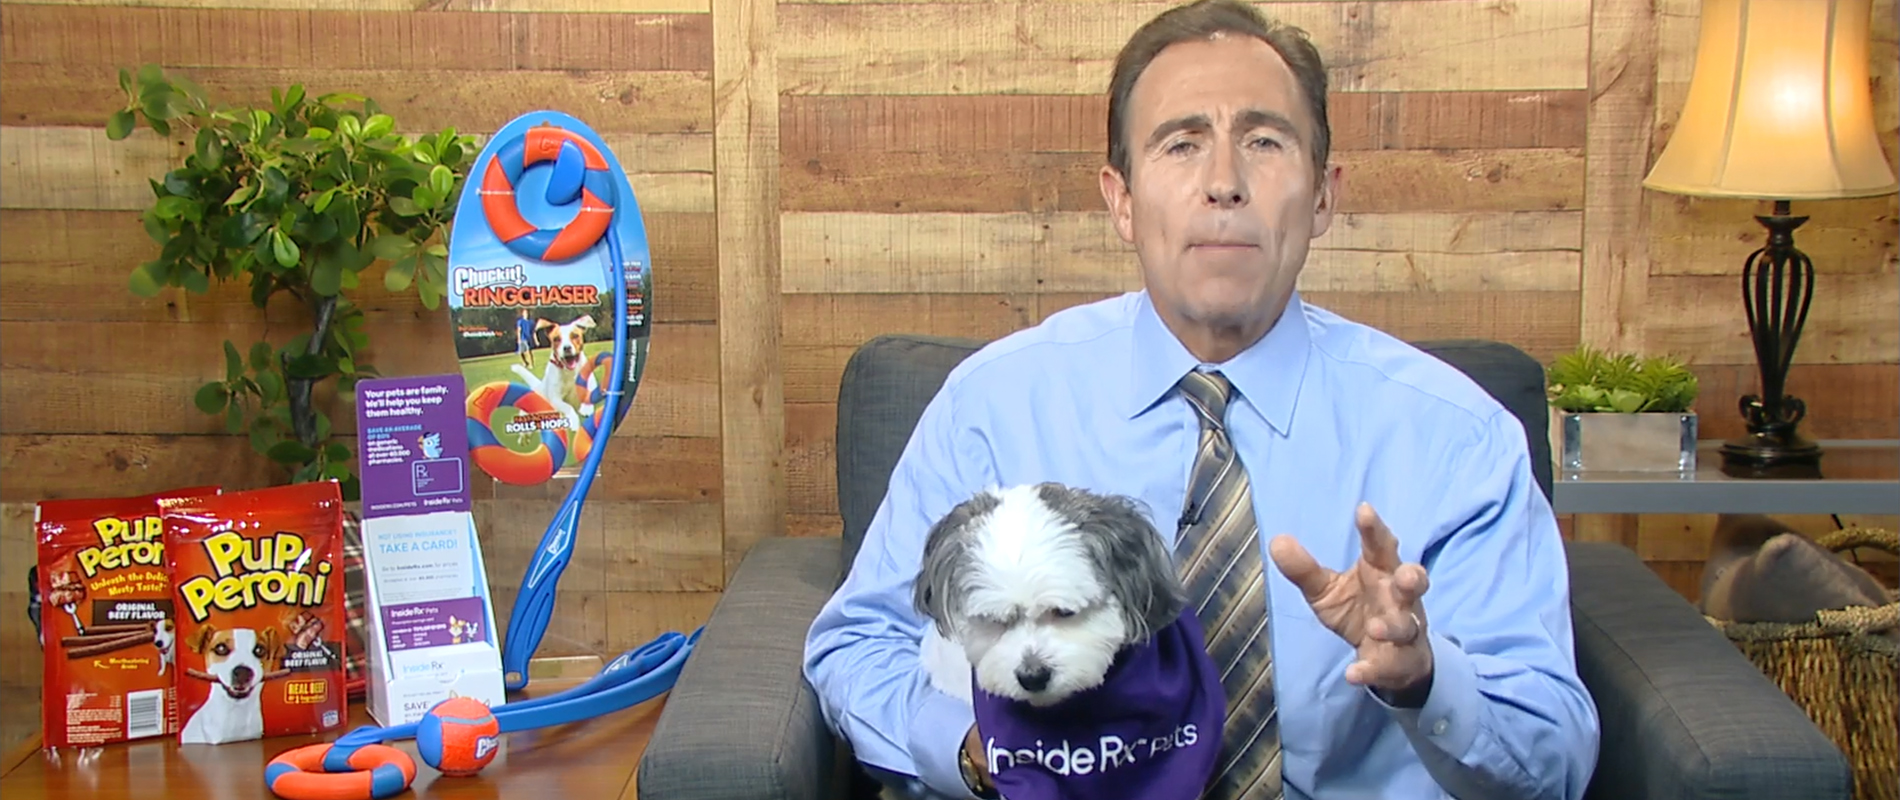 Dr. Jeff Werber talking about cold weather hazards and his top fall pet-care tips